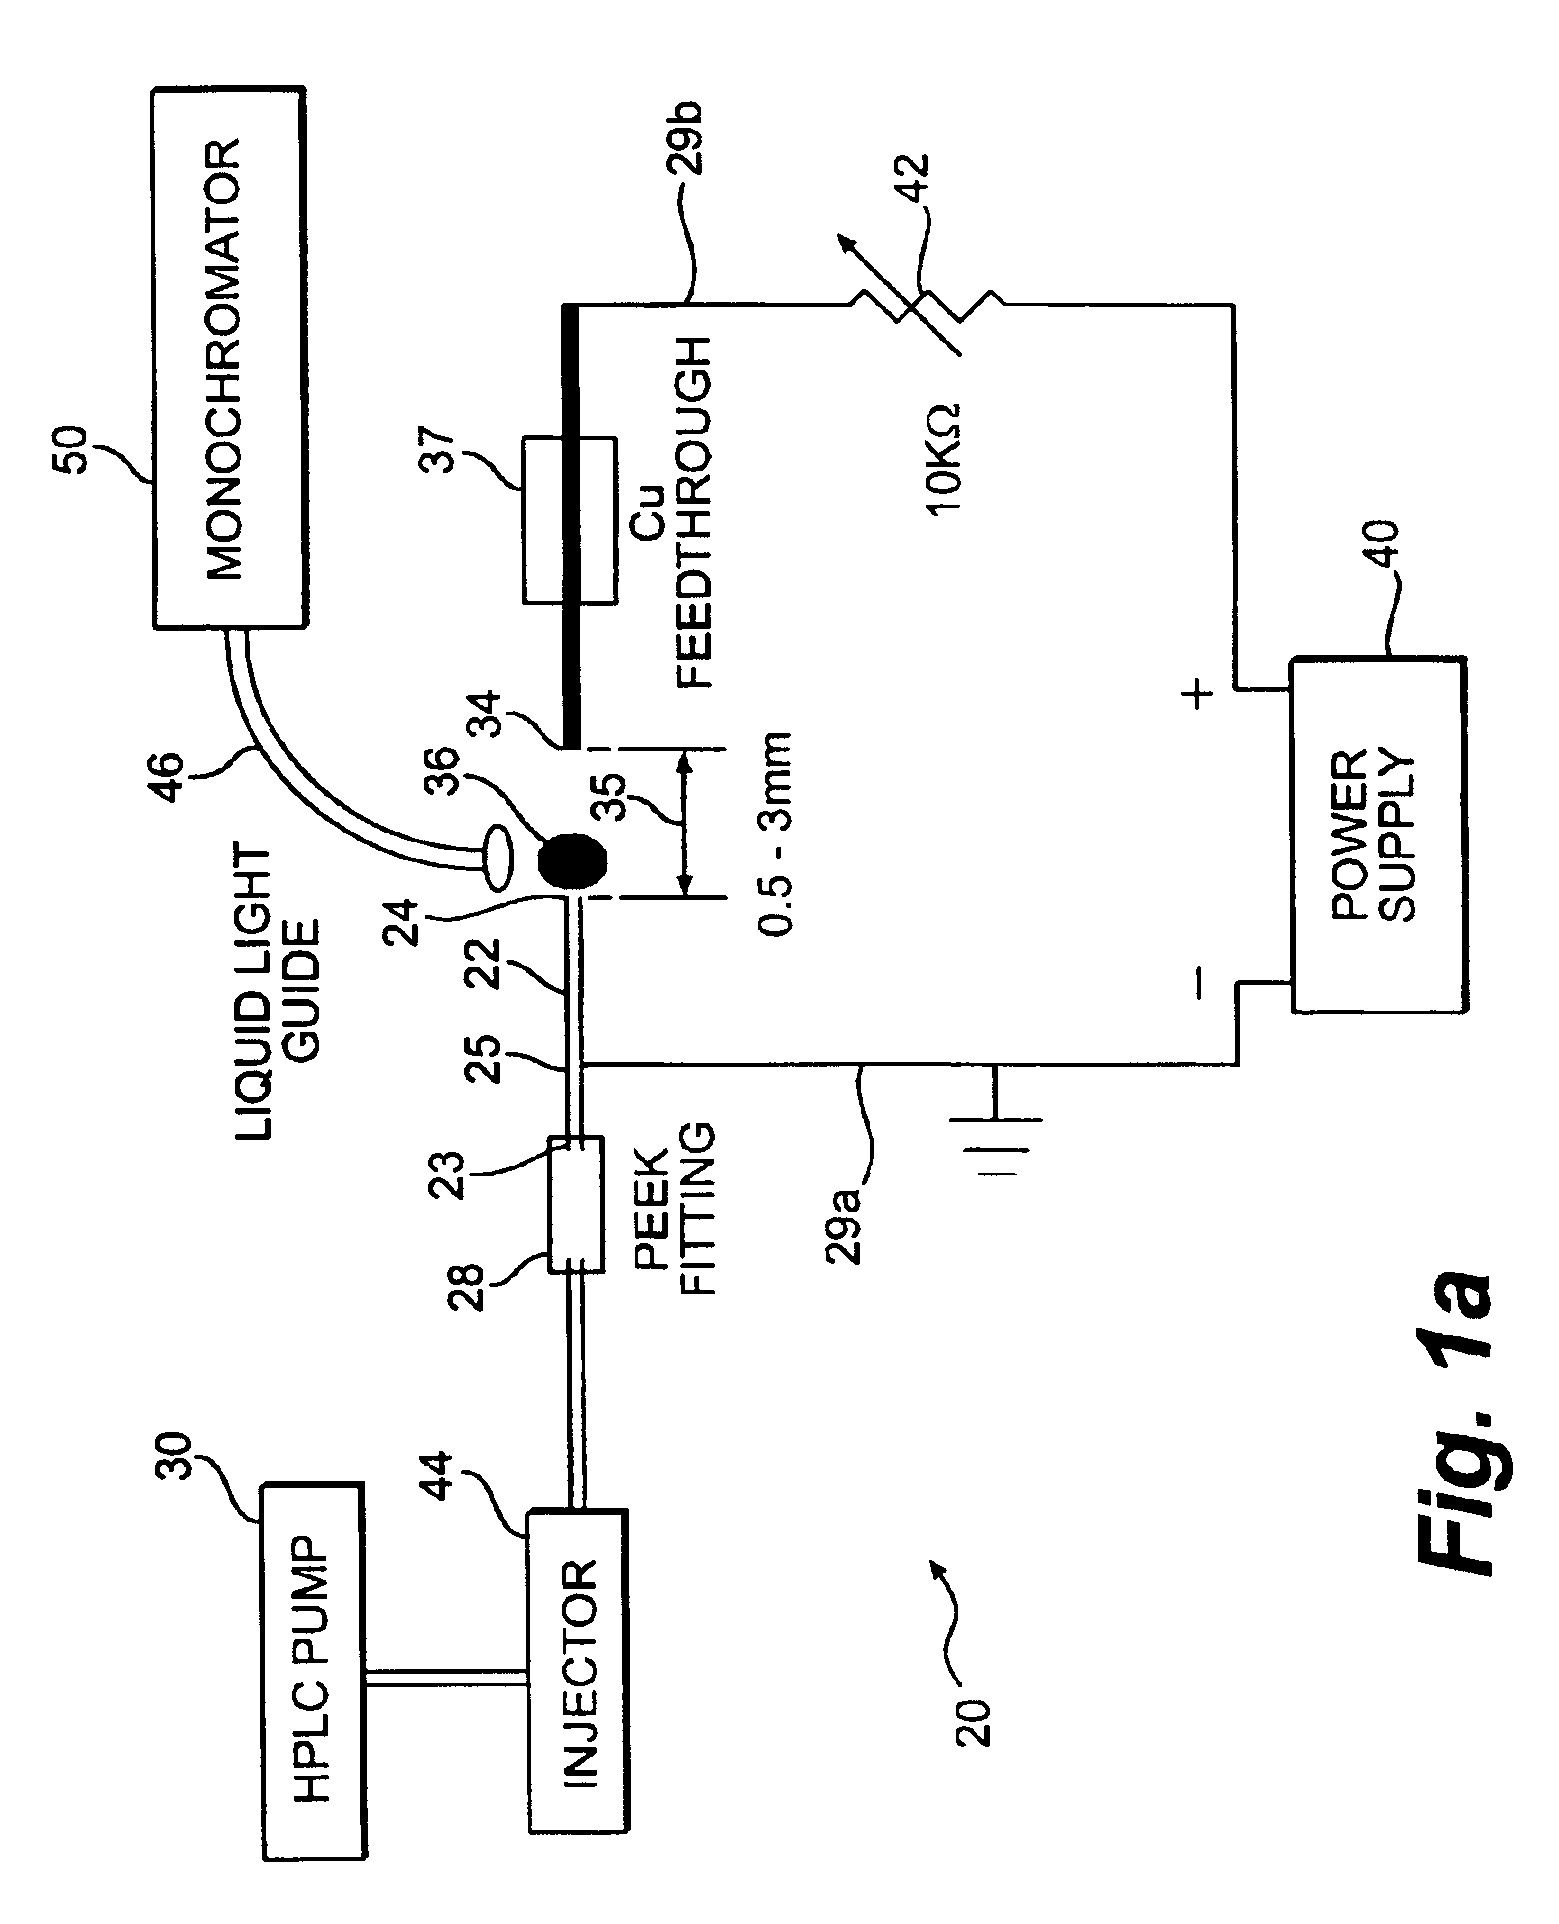 Atmospheric pressure, glow discharge, optical emission source for the direct sampling of liquid media